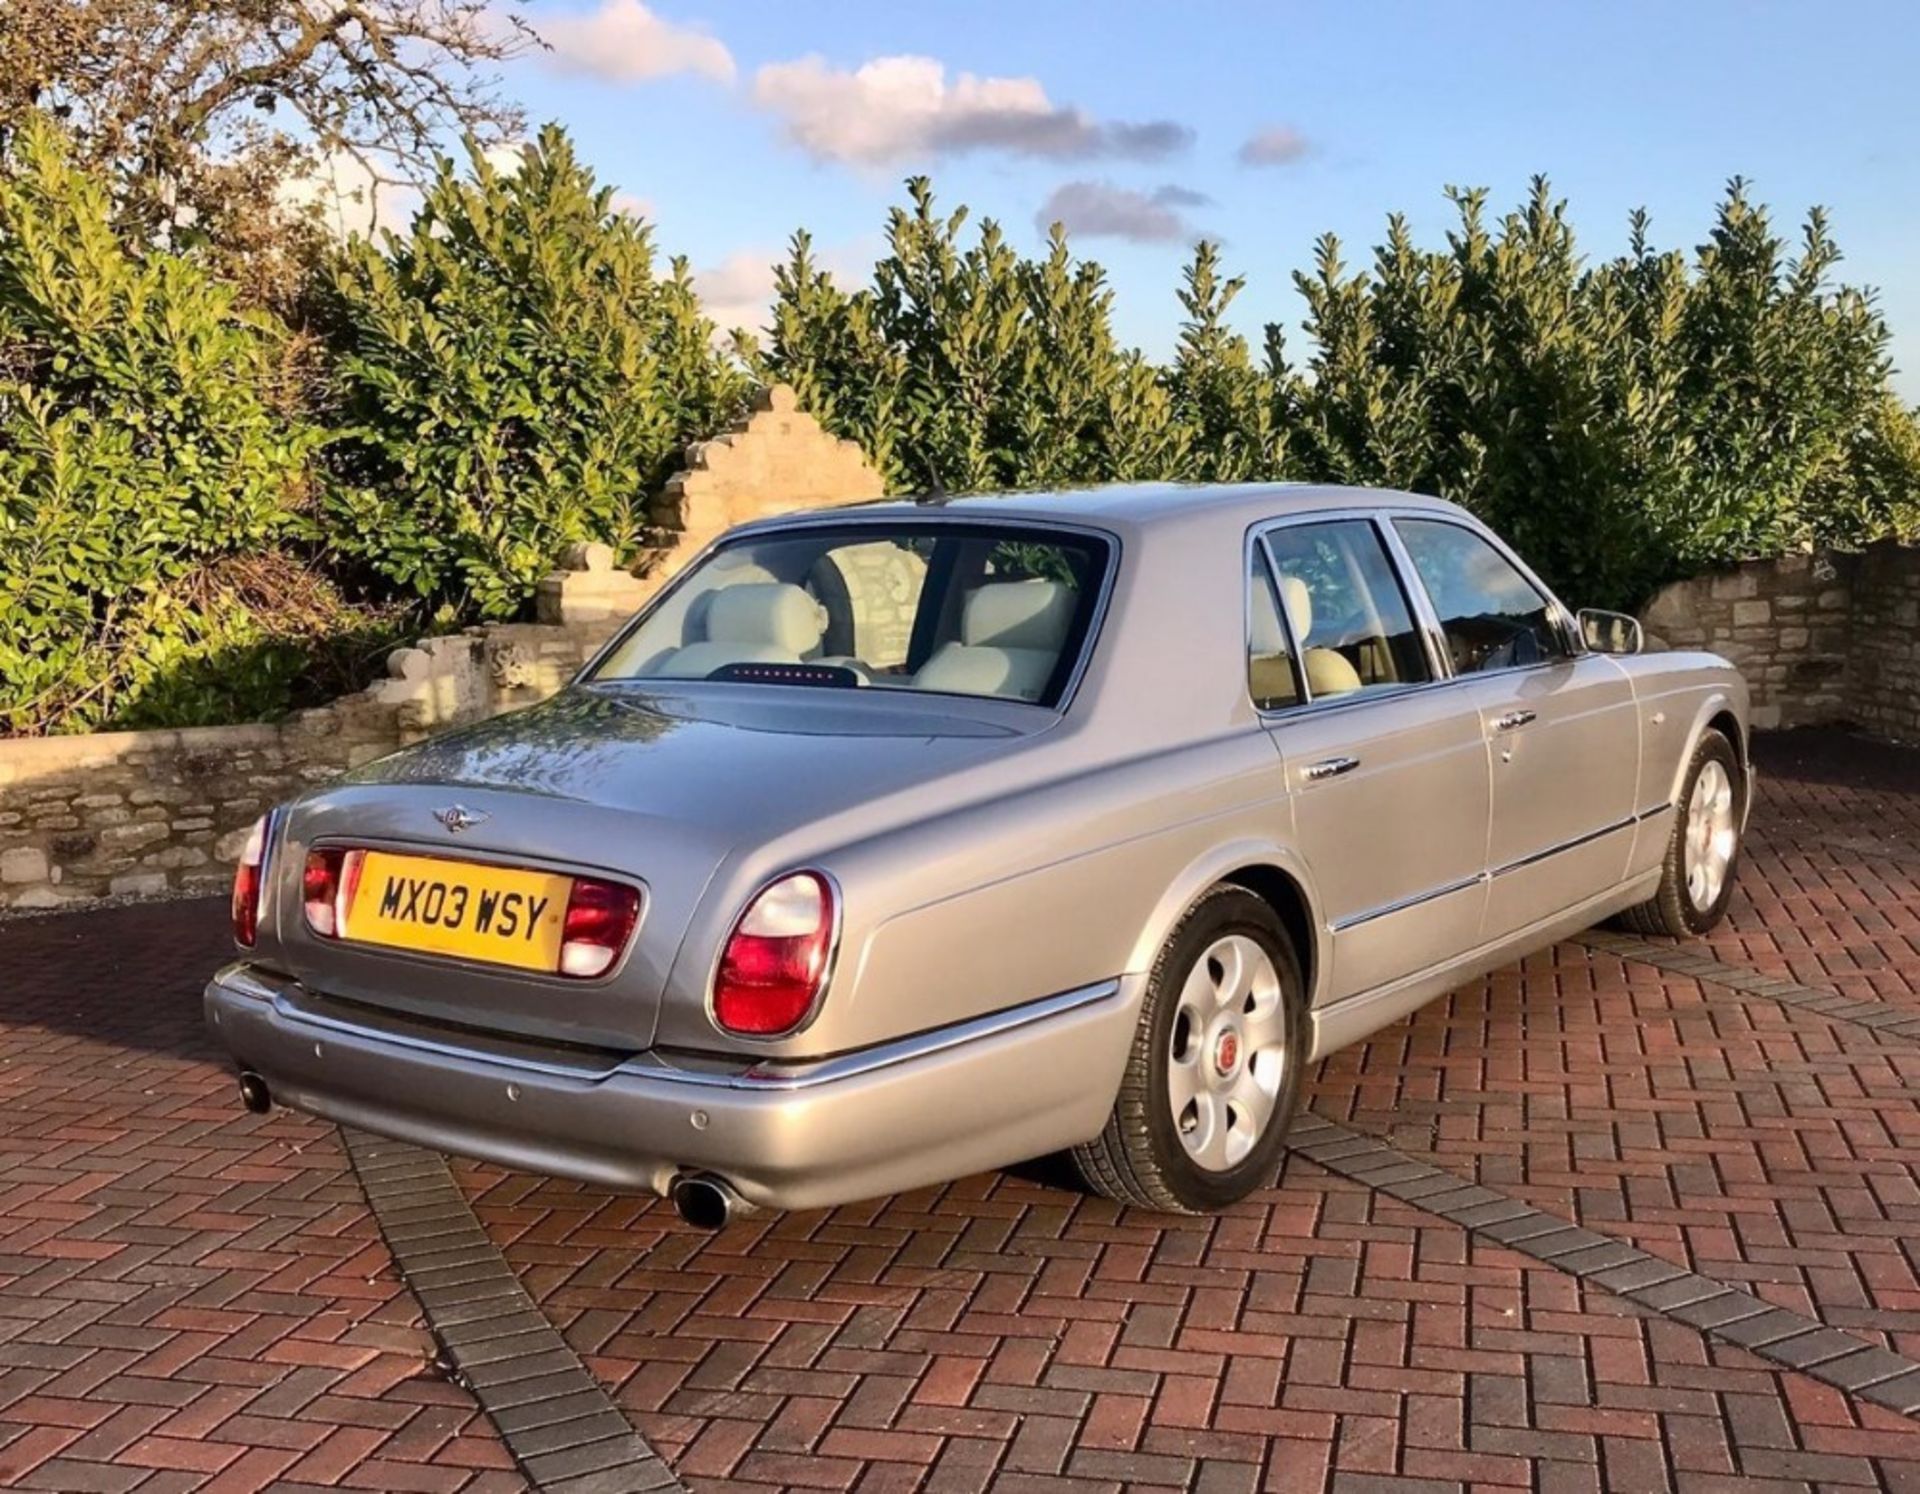 2003 BENTLEY ARNAGE R Registration Number: MX03 WSY Chassis Number: TBA Recorded Mileage: 54,214 - Image 5 of 13